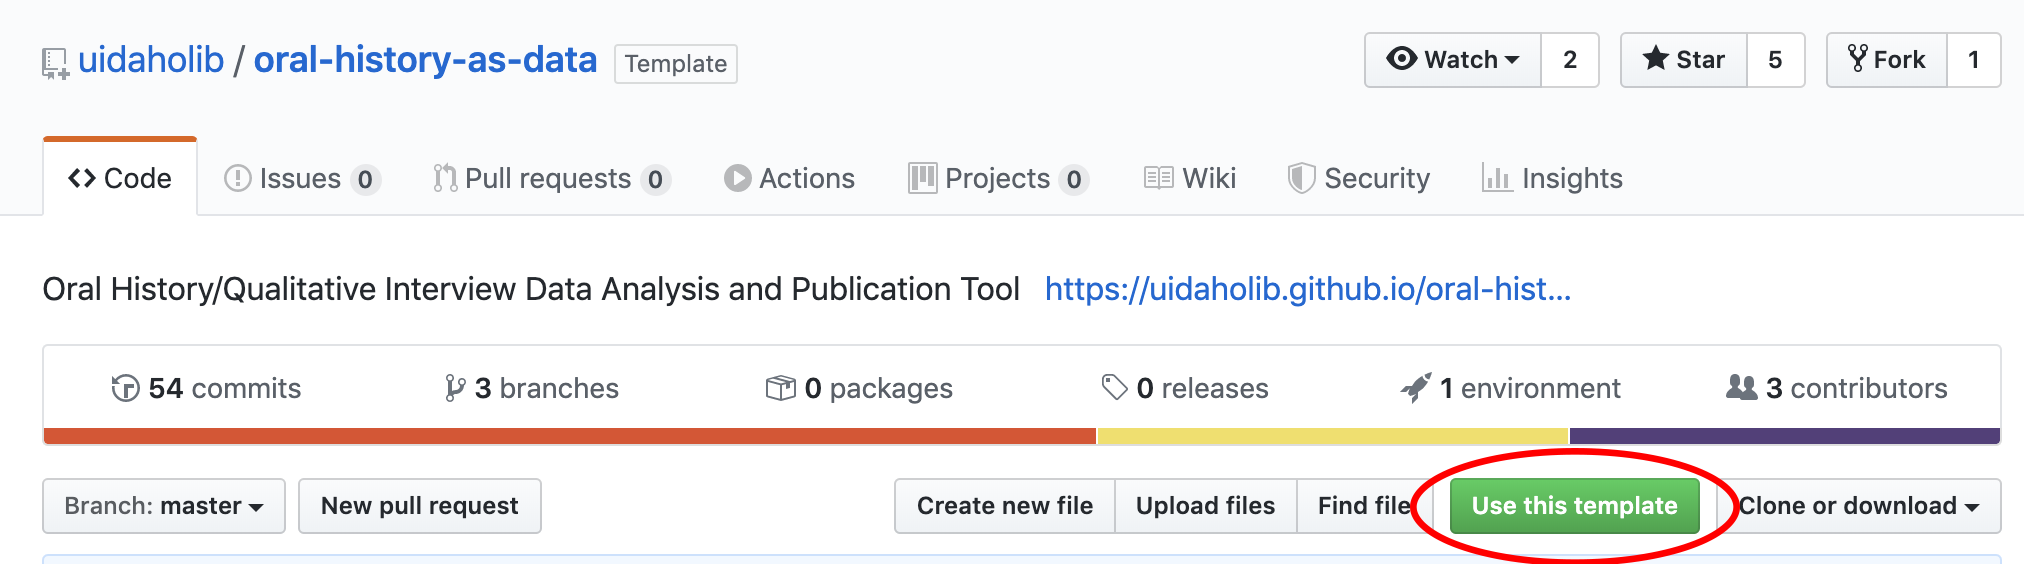 picture of the button that enables user to create a new template in github